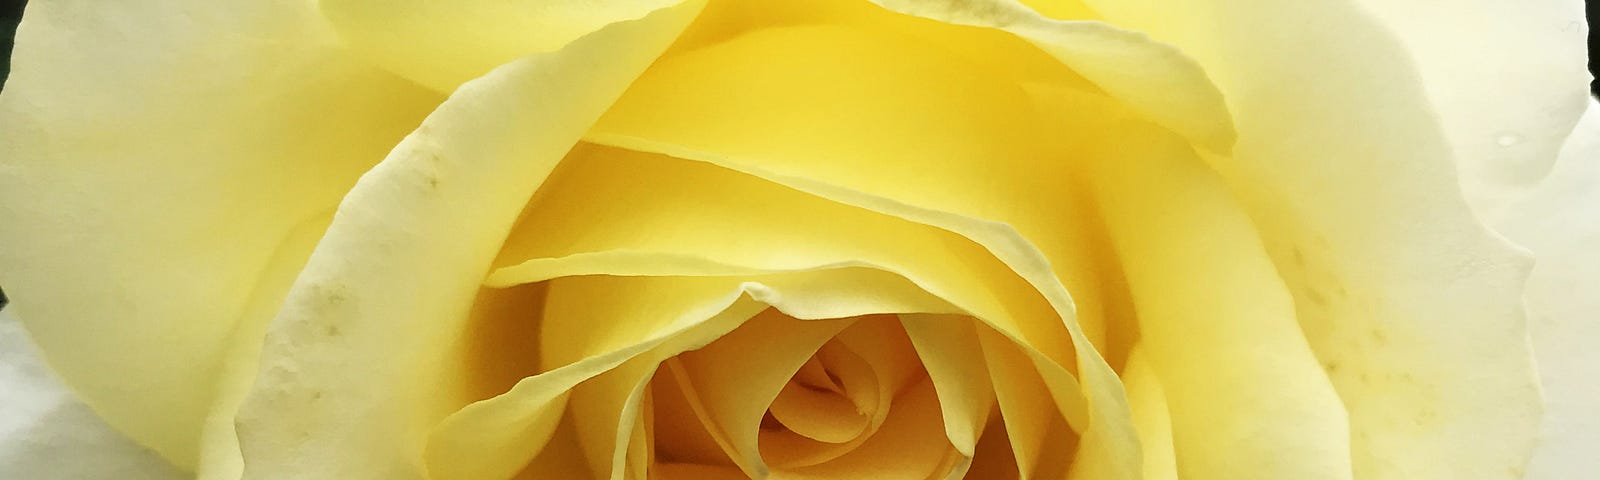 photo of a yellow rose